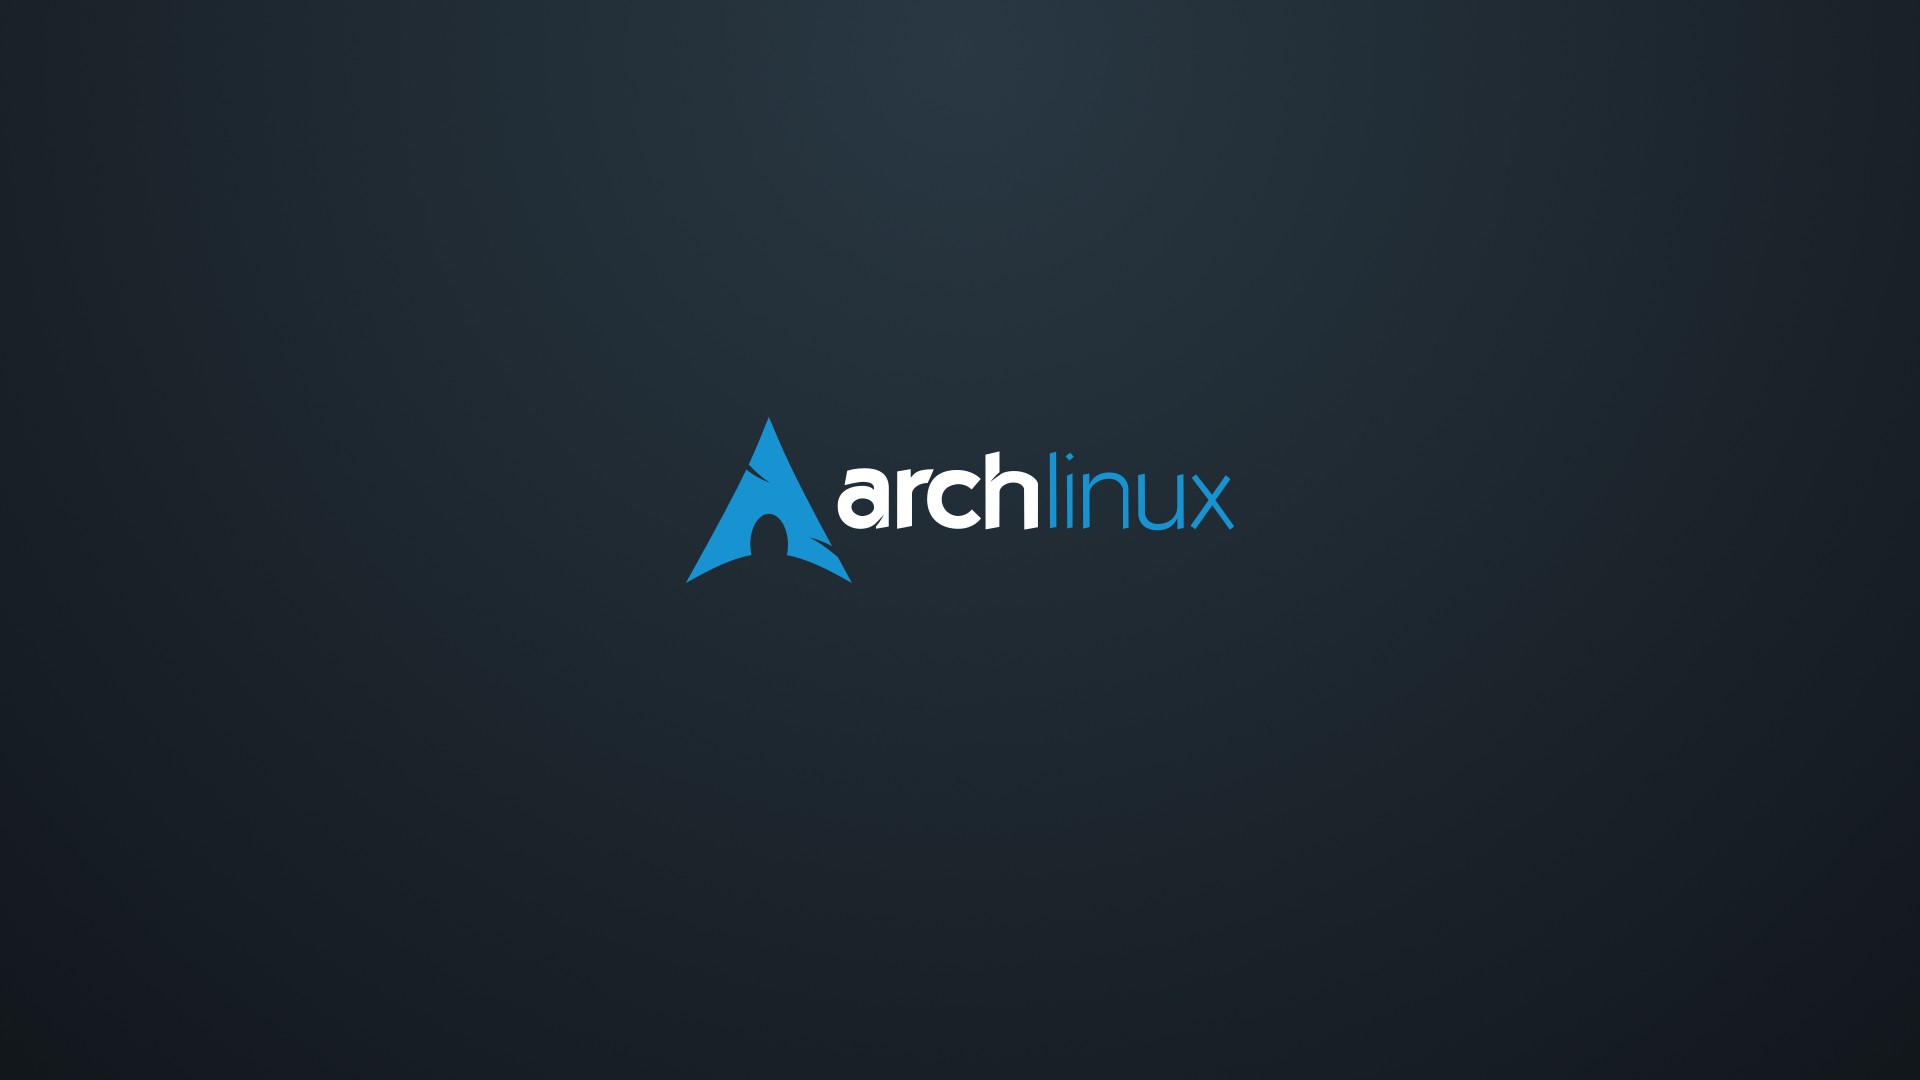 Arch Linux Archlinux Linux Operating Systems Wallpapers Hd Desktop